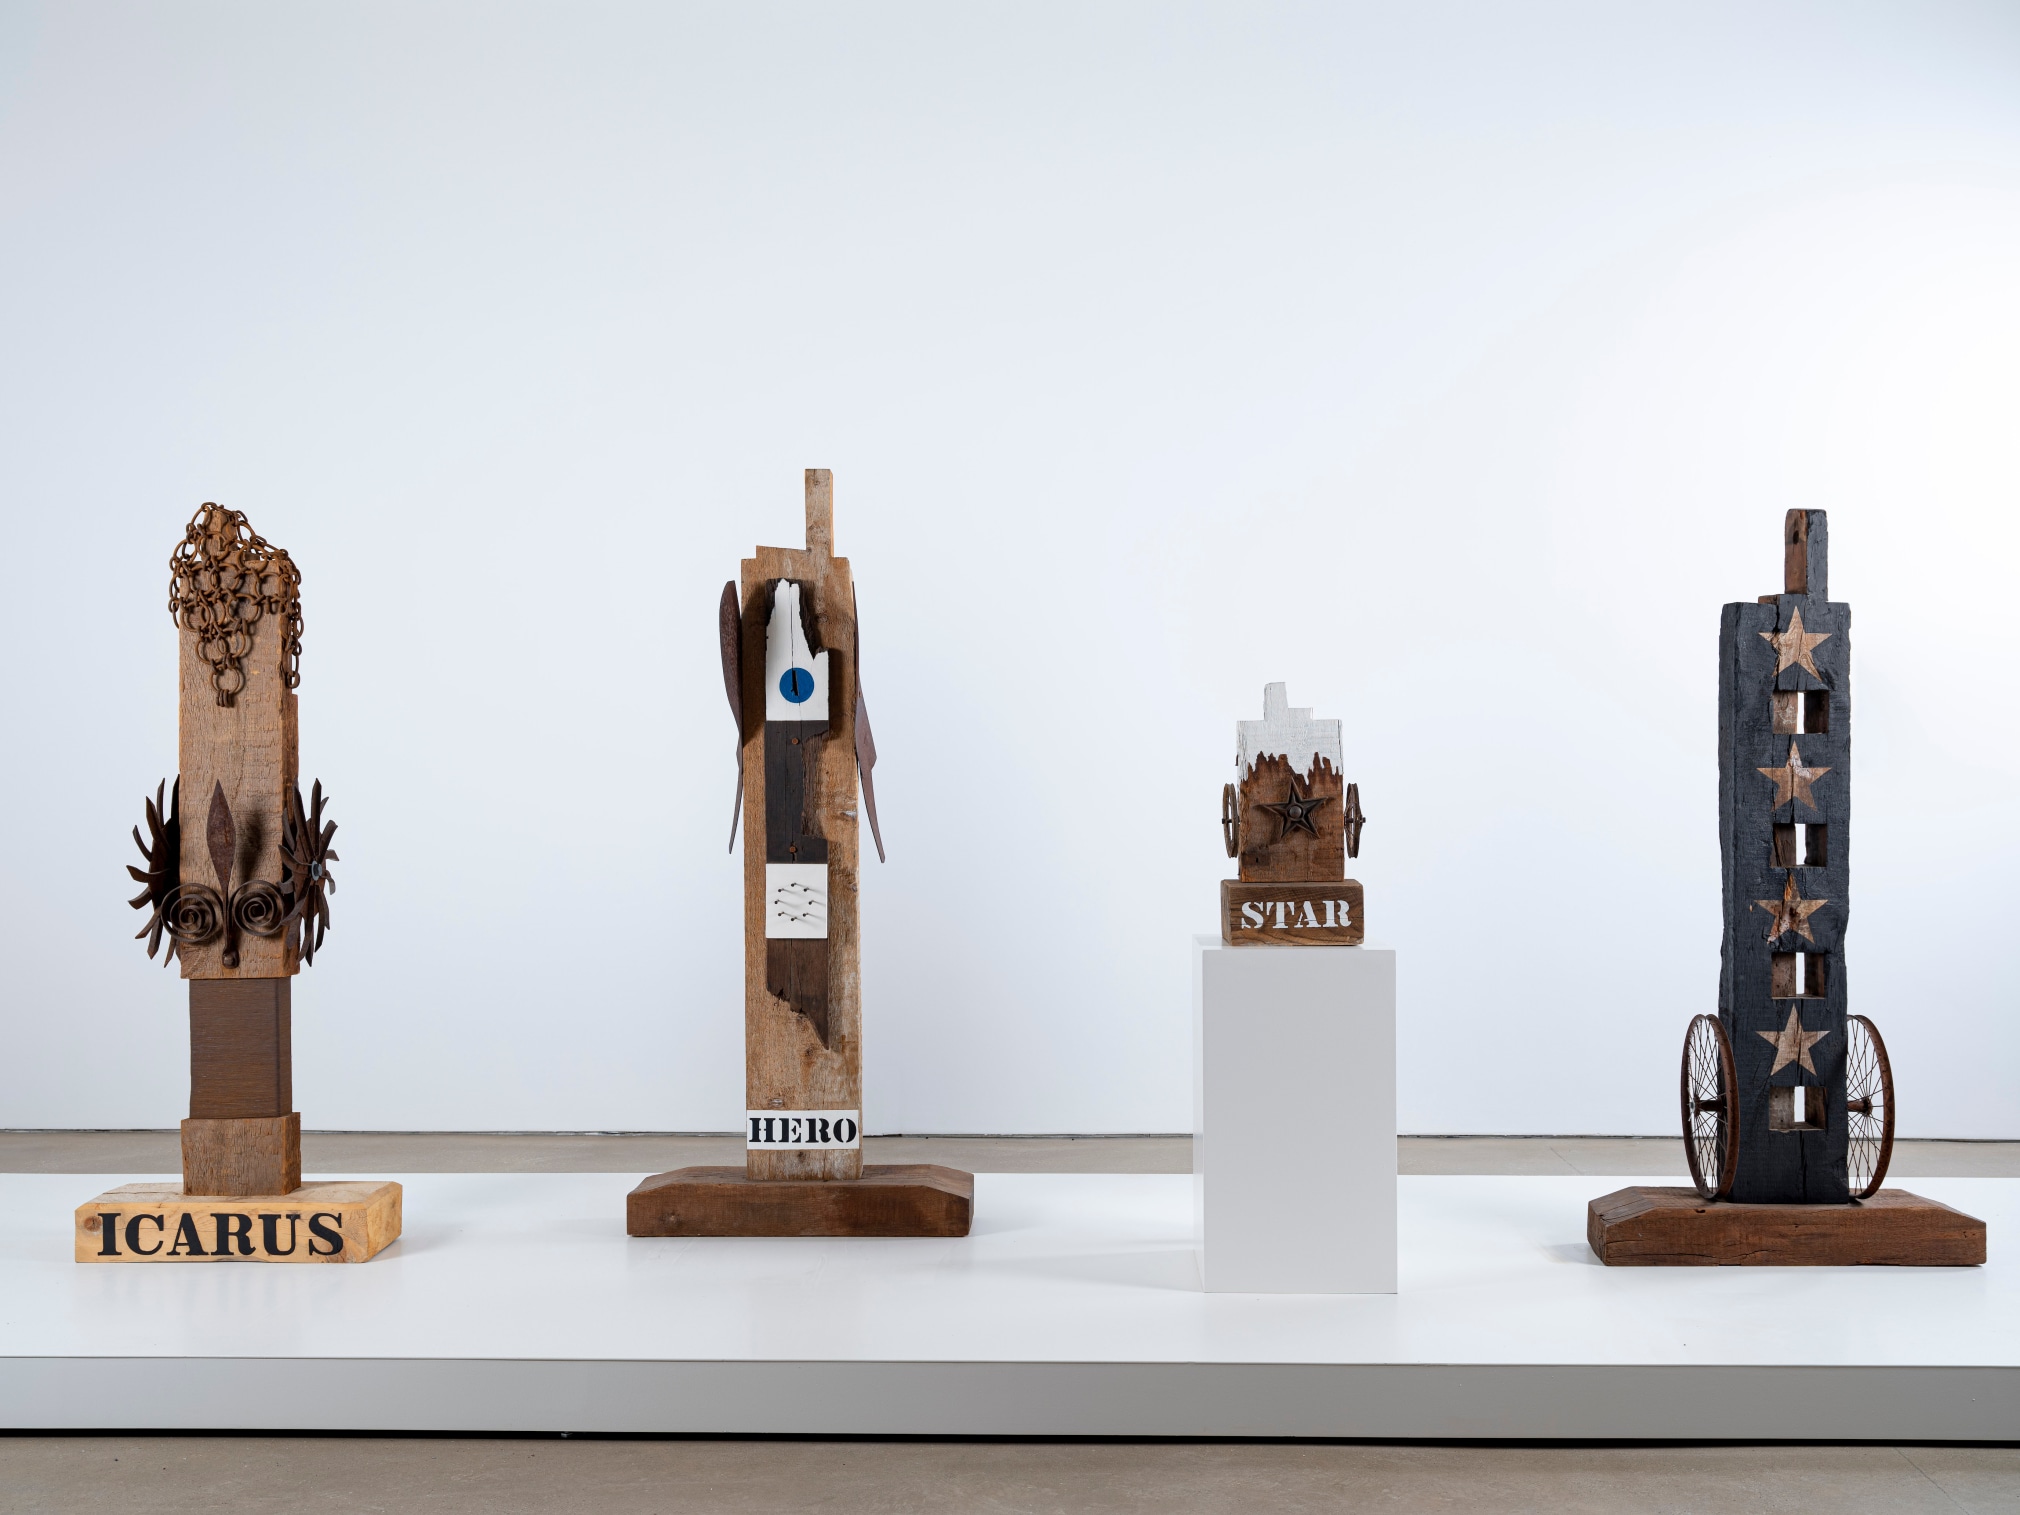 Installation view of&nbsp;Robert Indiana: Sculpture 1958-2018,&nbsp;Yorkshire Sculpture Park, Wakefield,&nbsp;March 12, 2022&ndash;April 16, 2023. Left to right, Icarus (1992), Hero (1992), Star (1999), and Four Star (1993), &nbsp;